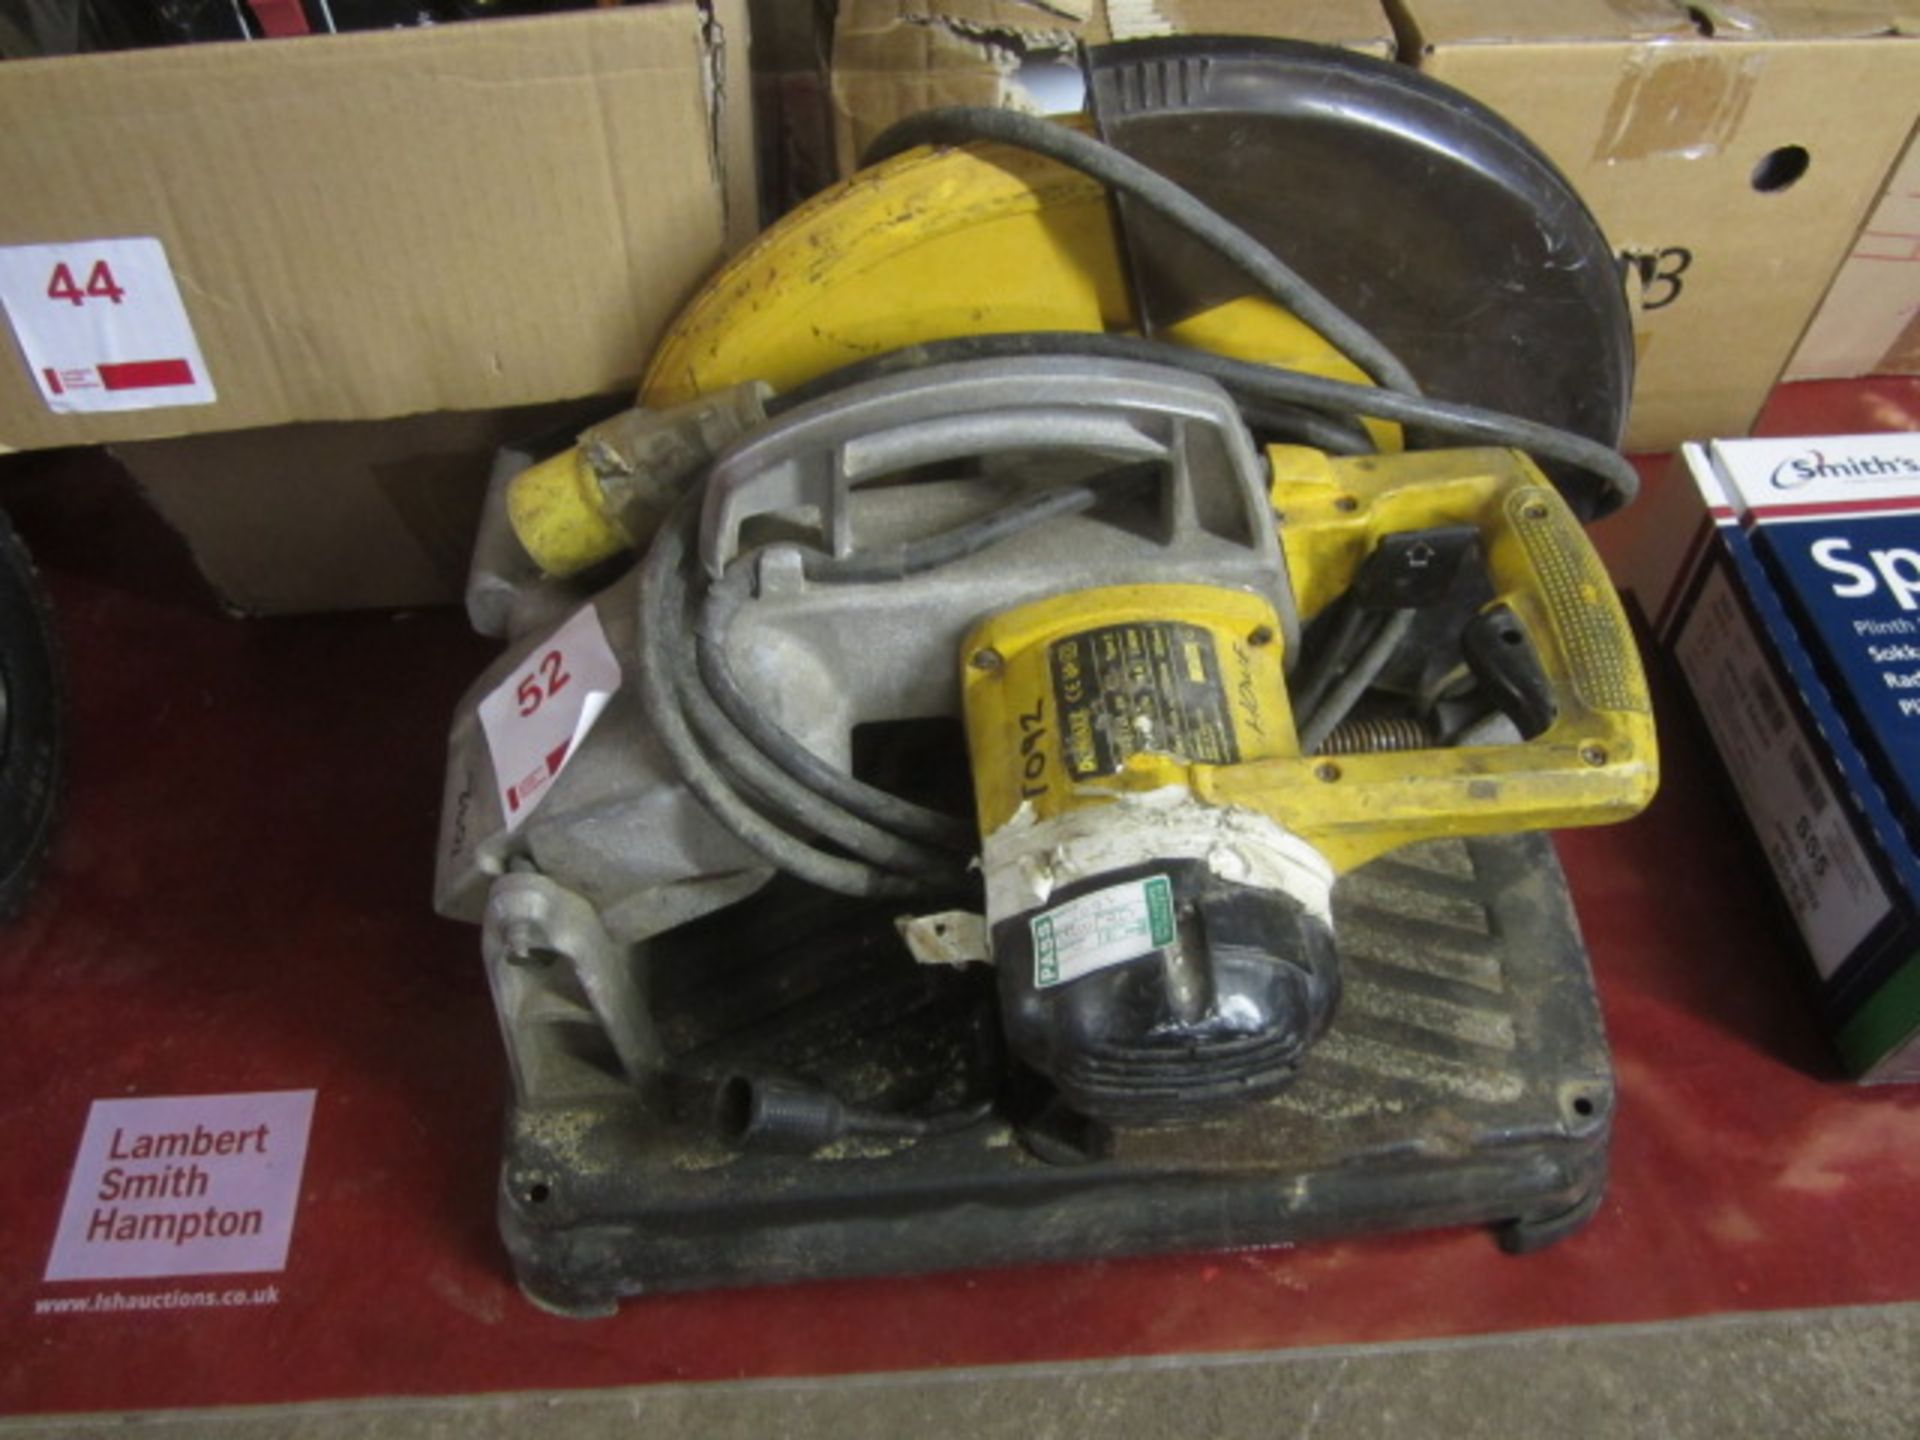 Dewalt DW872L cut off saw, serial number: 31090, 100v - working condition unknown ** Located: